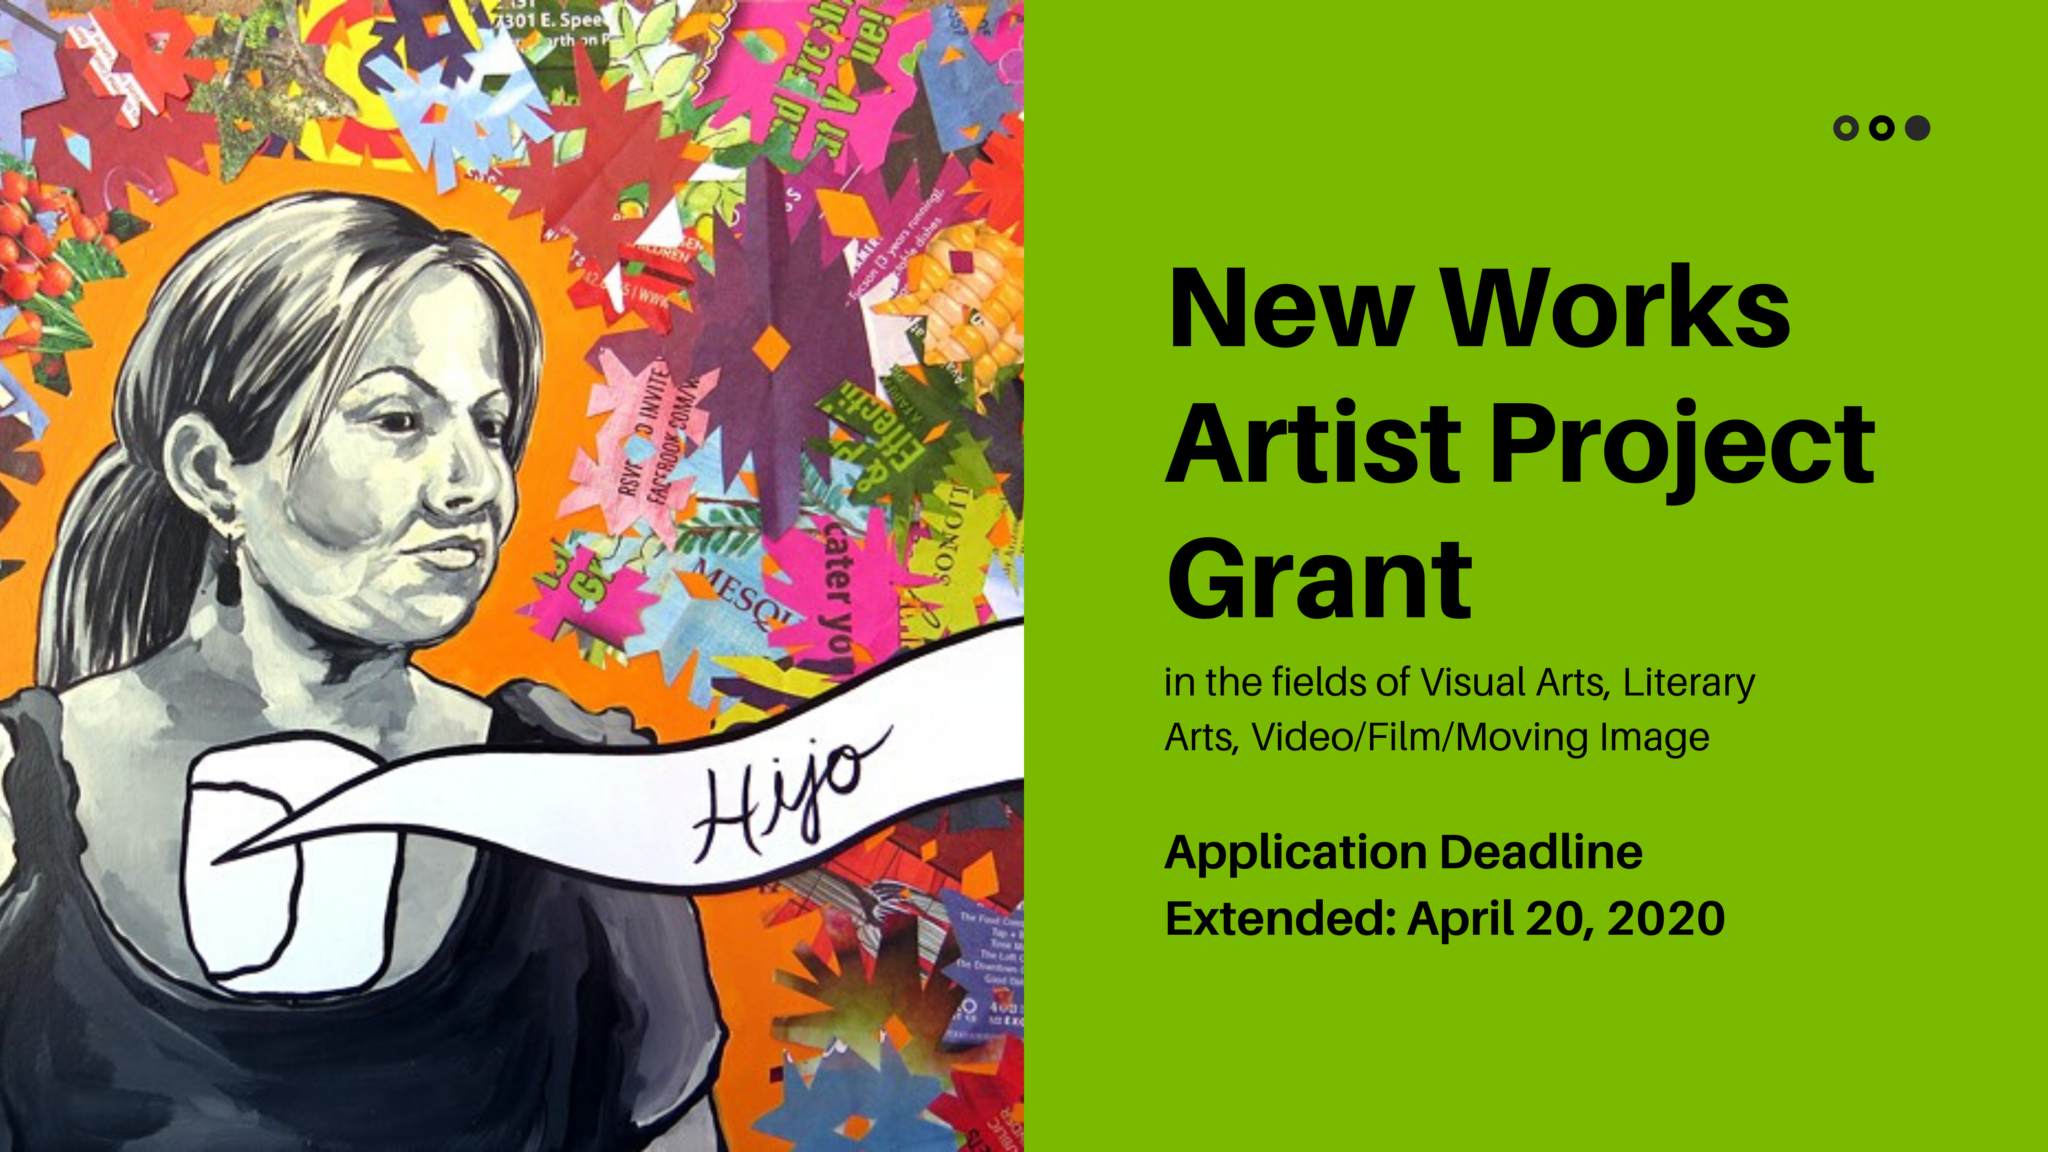 New Works Artist Project Grant applications extended through April 20th!